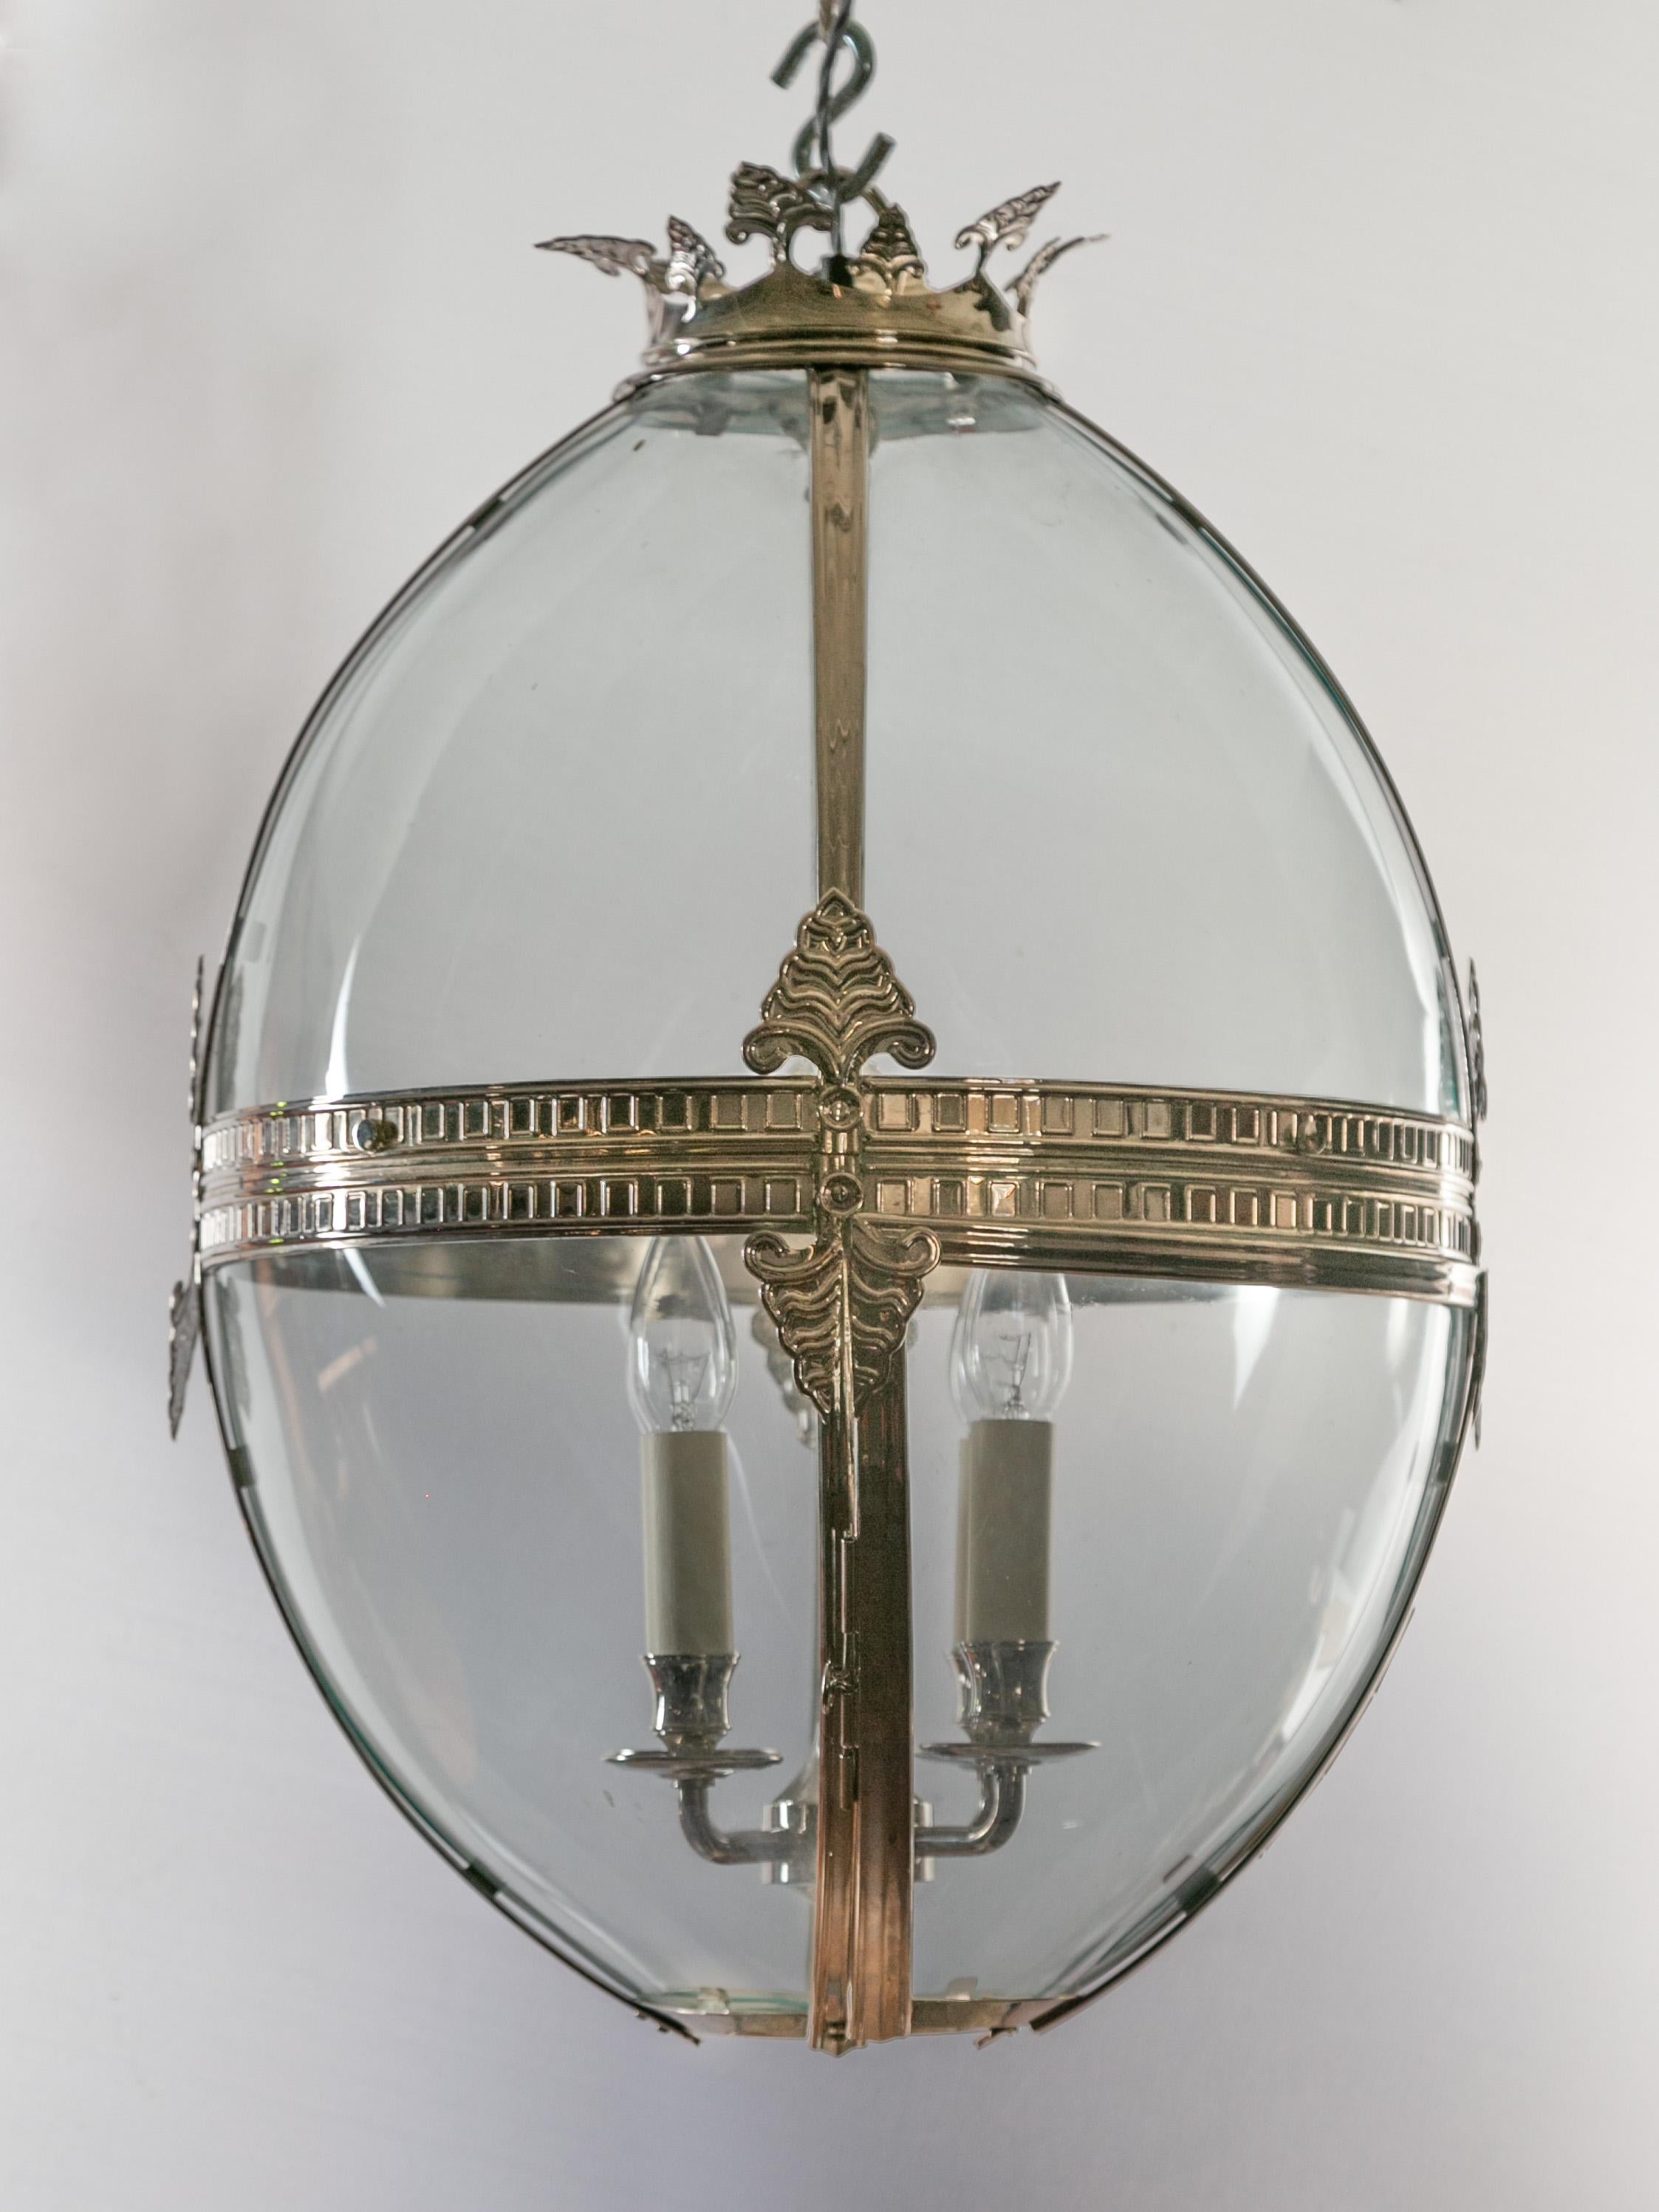 20th Century English Midcentury Nickel and Glass Four-Light Ovoid Lantern with Palmettes For Sale